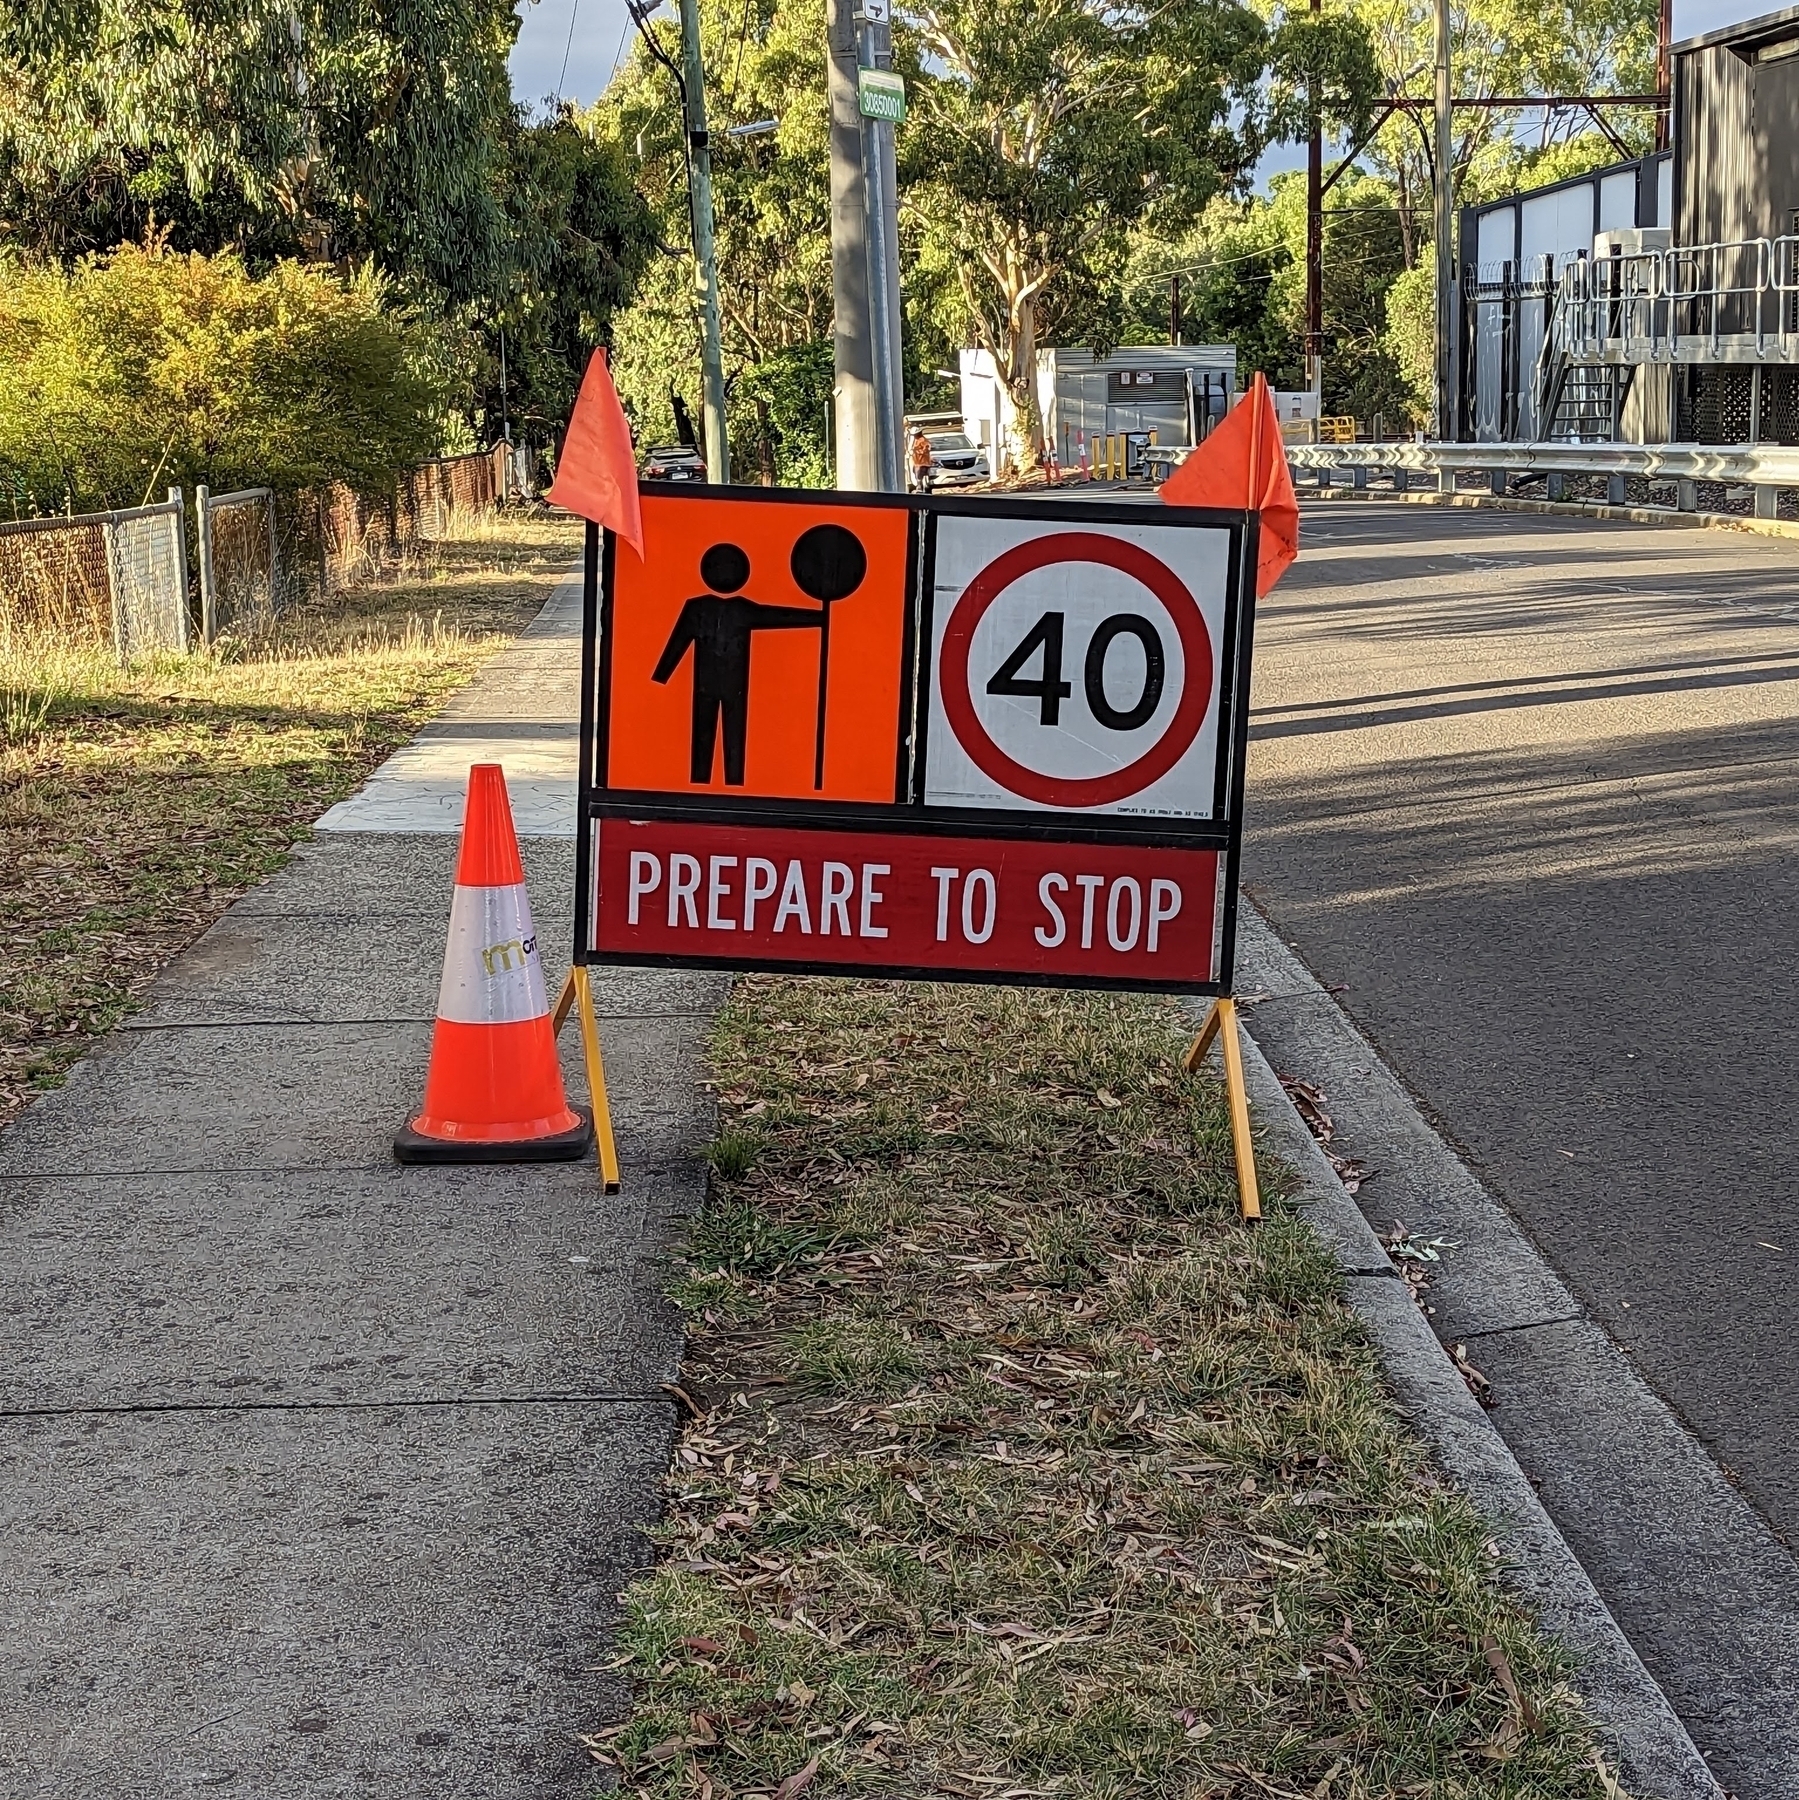 A road works sign with a 40 km/h speed limit, a man holding a stop sign, and the lower portion saying Prepare to Stop